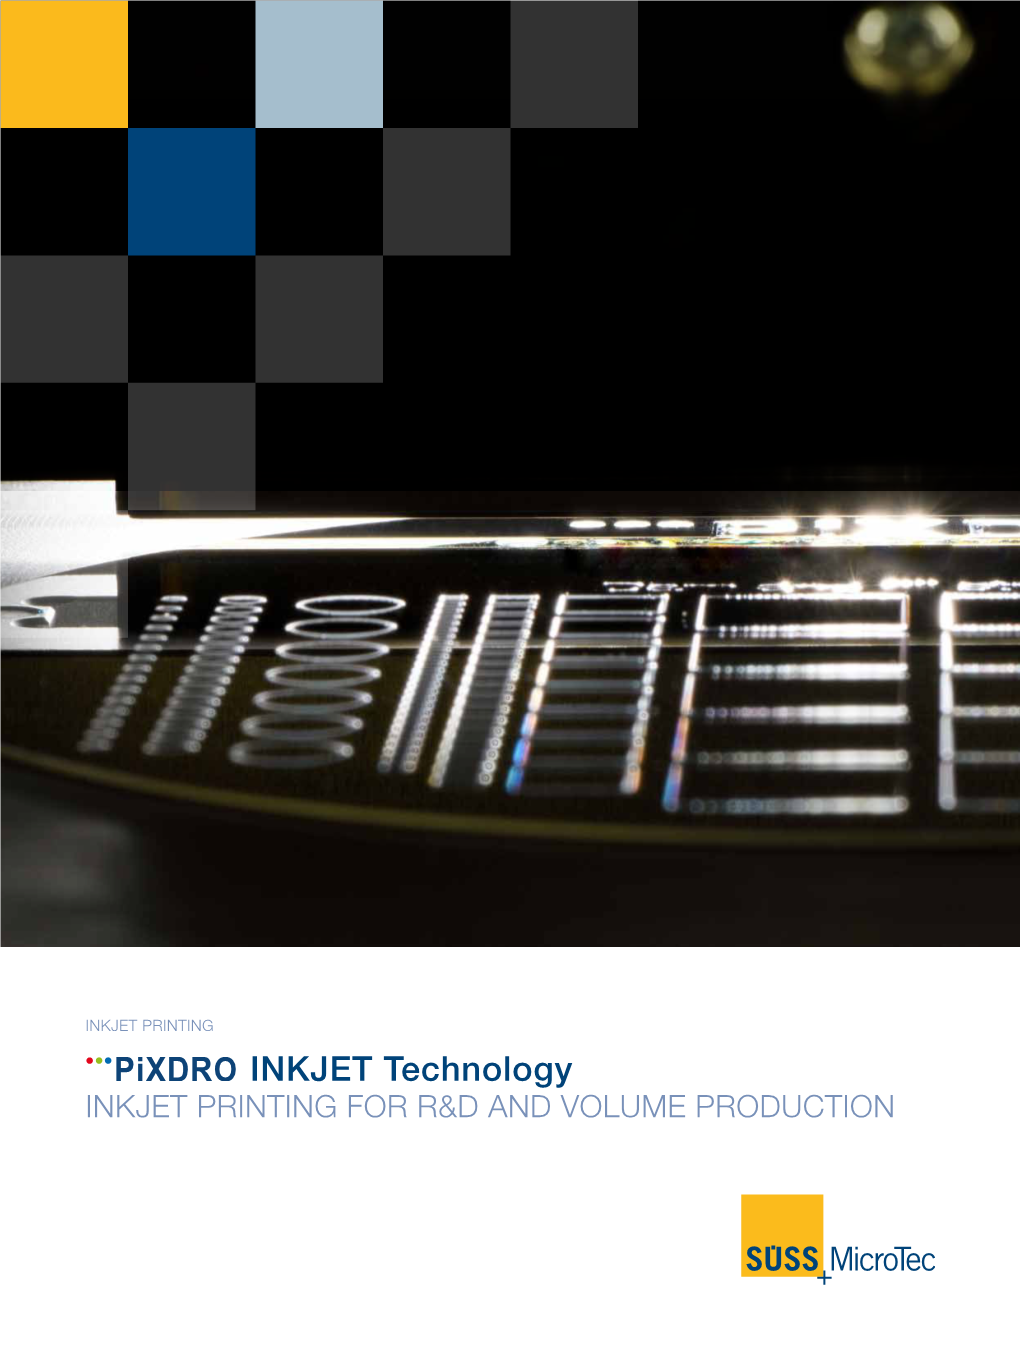 Pixdro INKJET PRINTING TECHNOLOGY for a LARGE VARIETY of PROCESSES